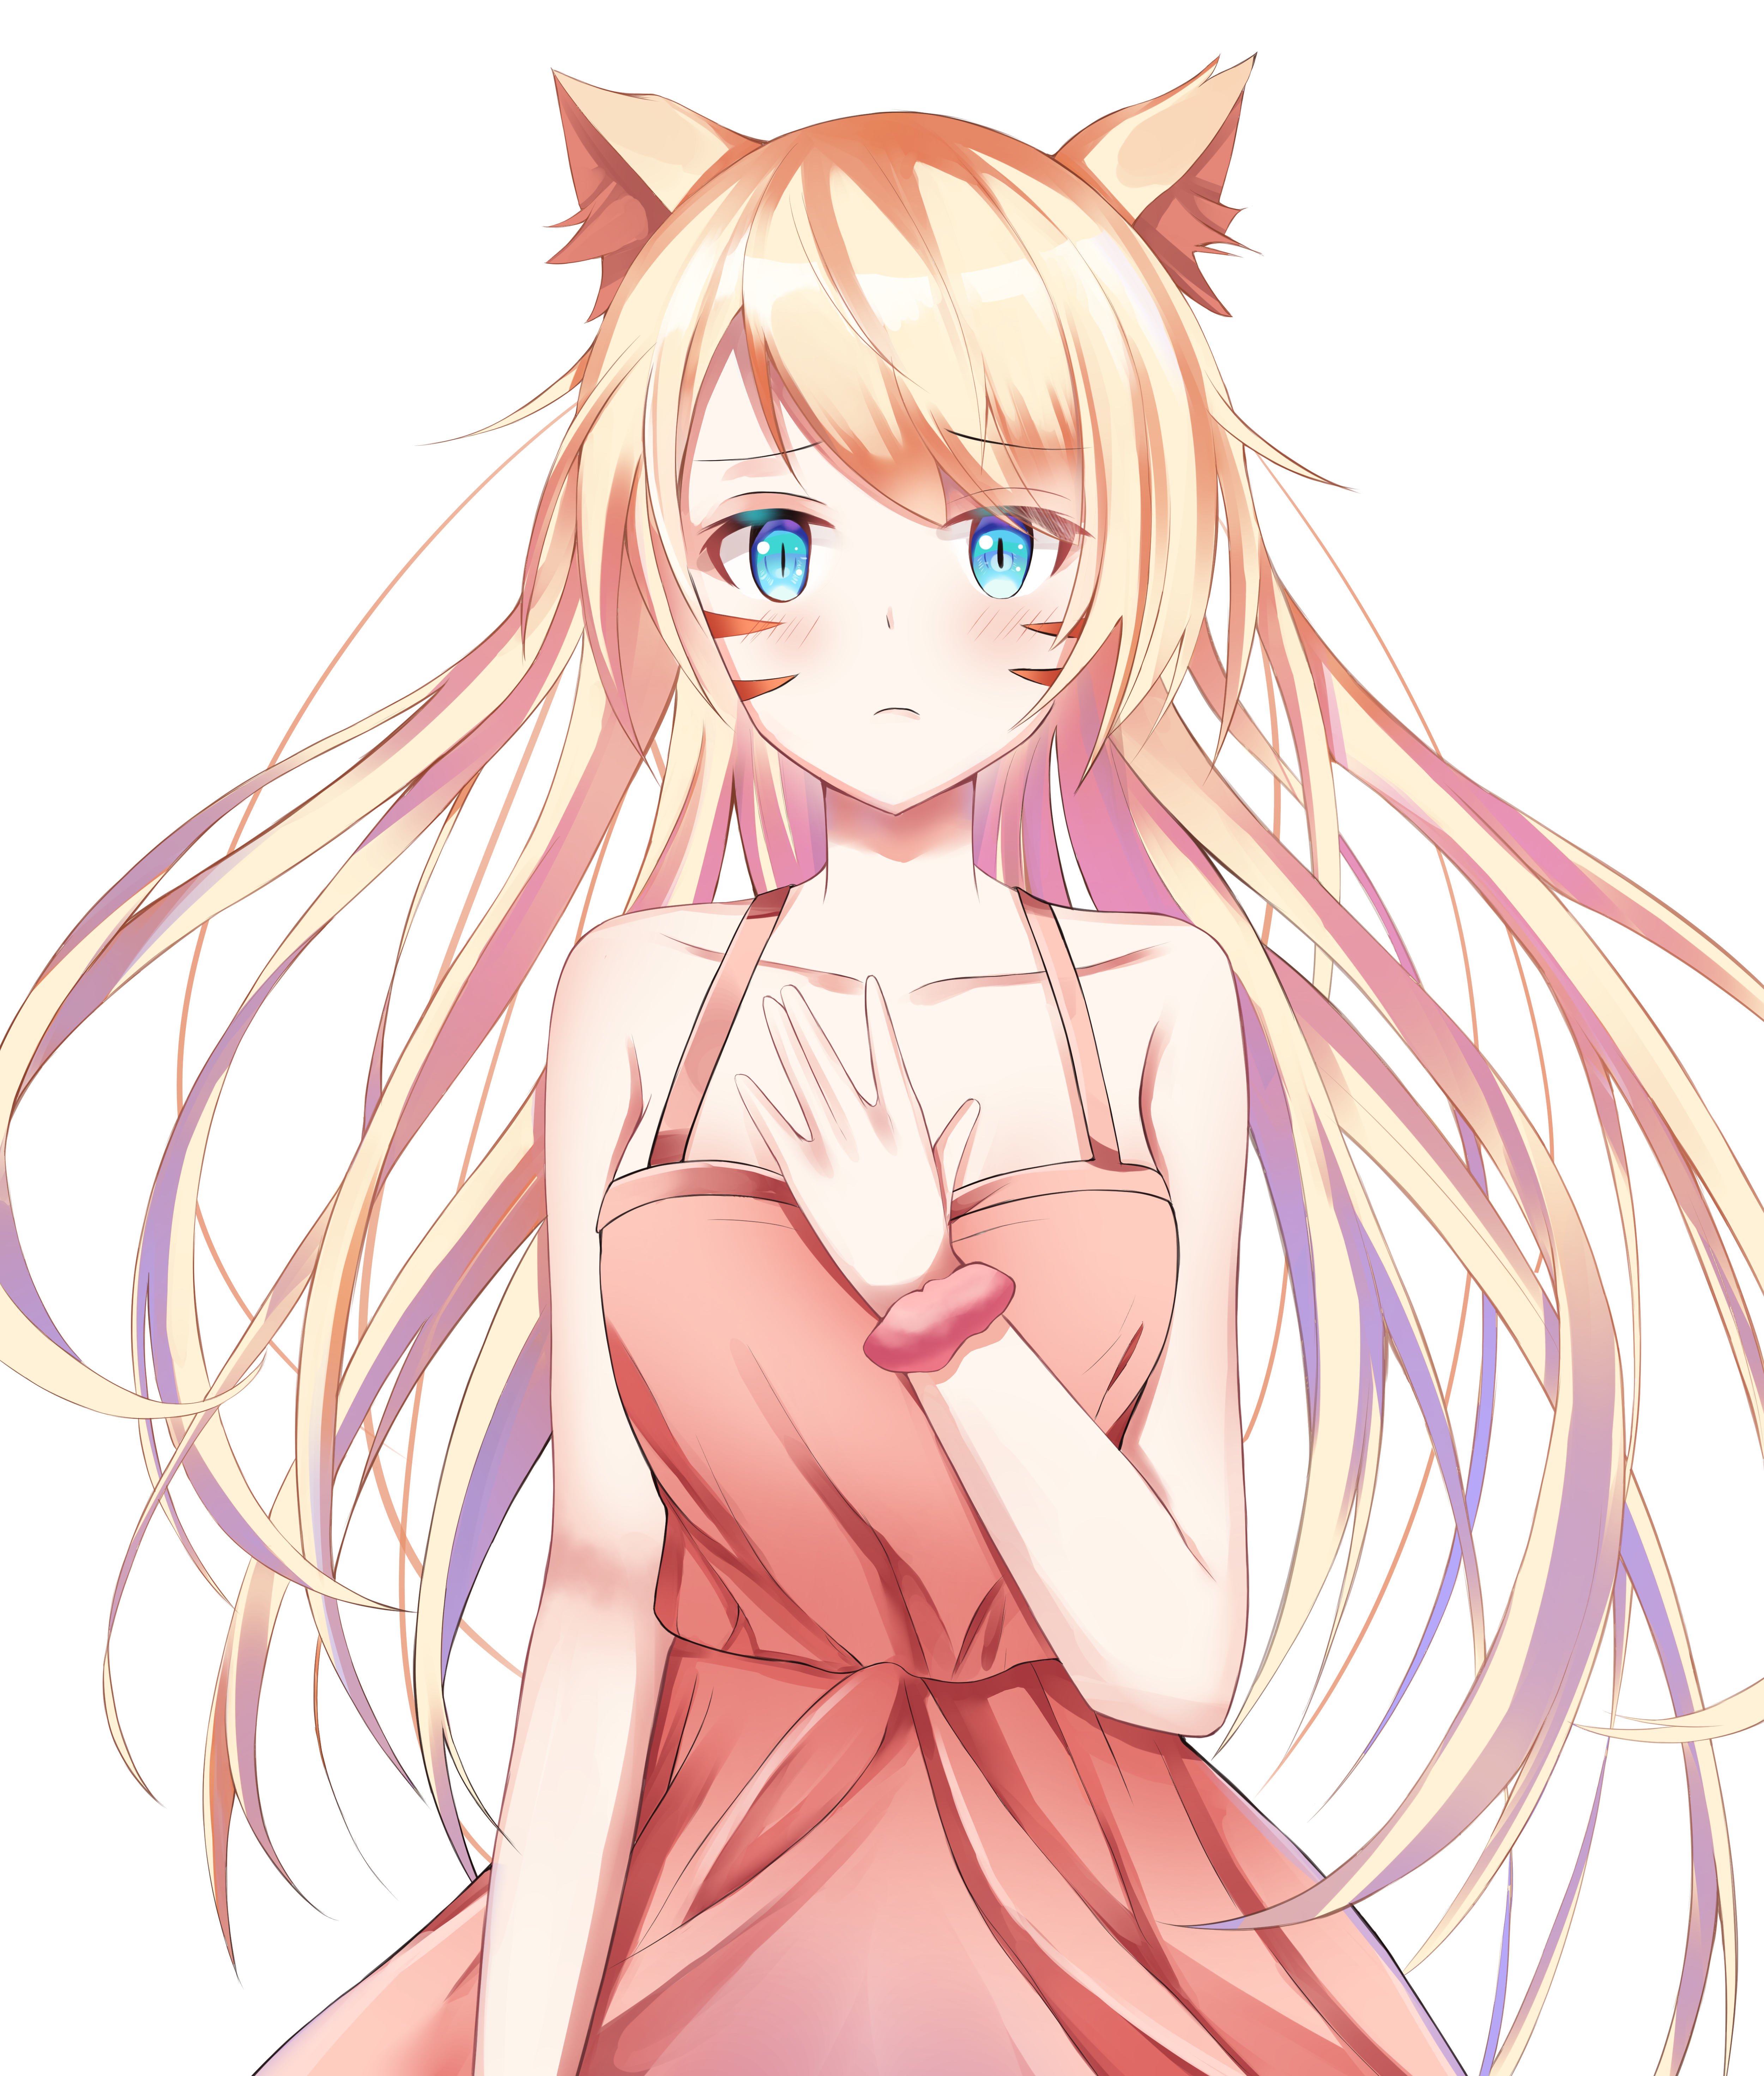 113703 Screensavers and Wallpapers Ears for phone. Download anime, sight, opinion, girl, ears, neko pictures for free